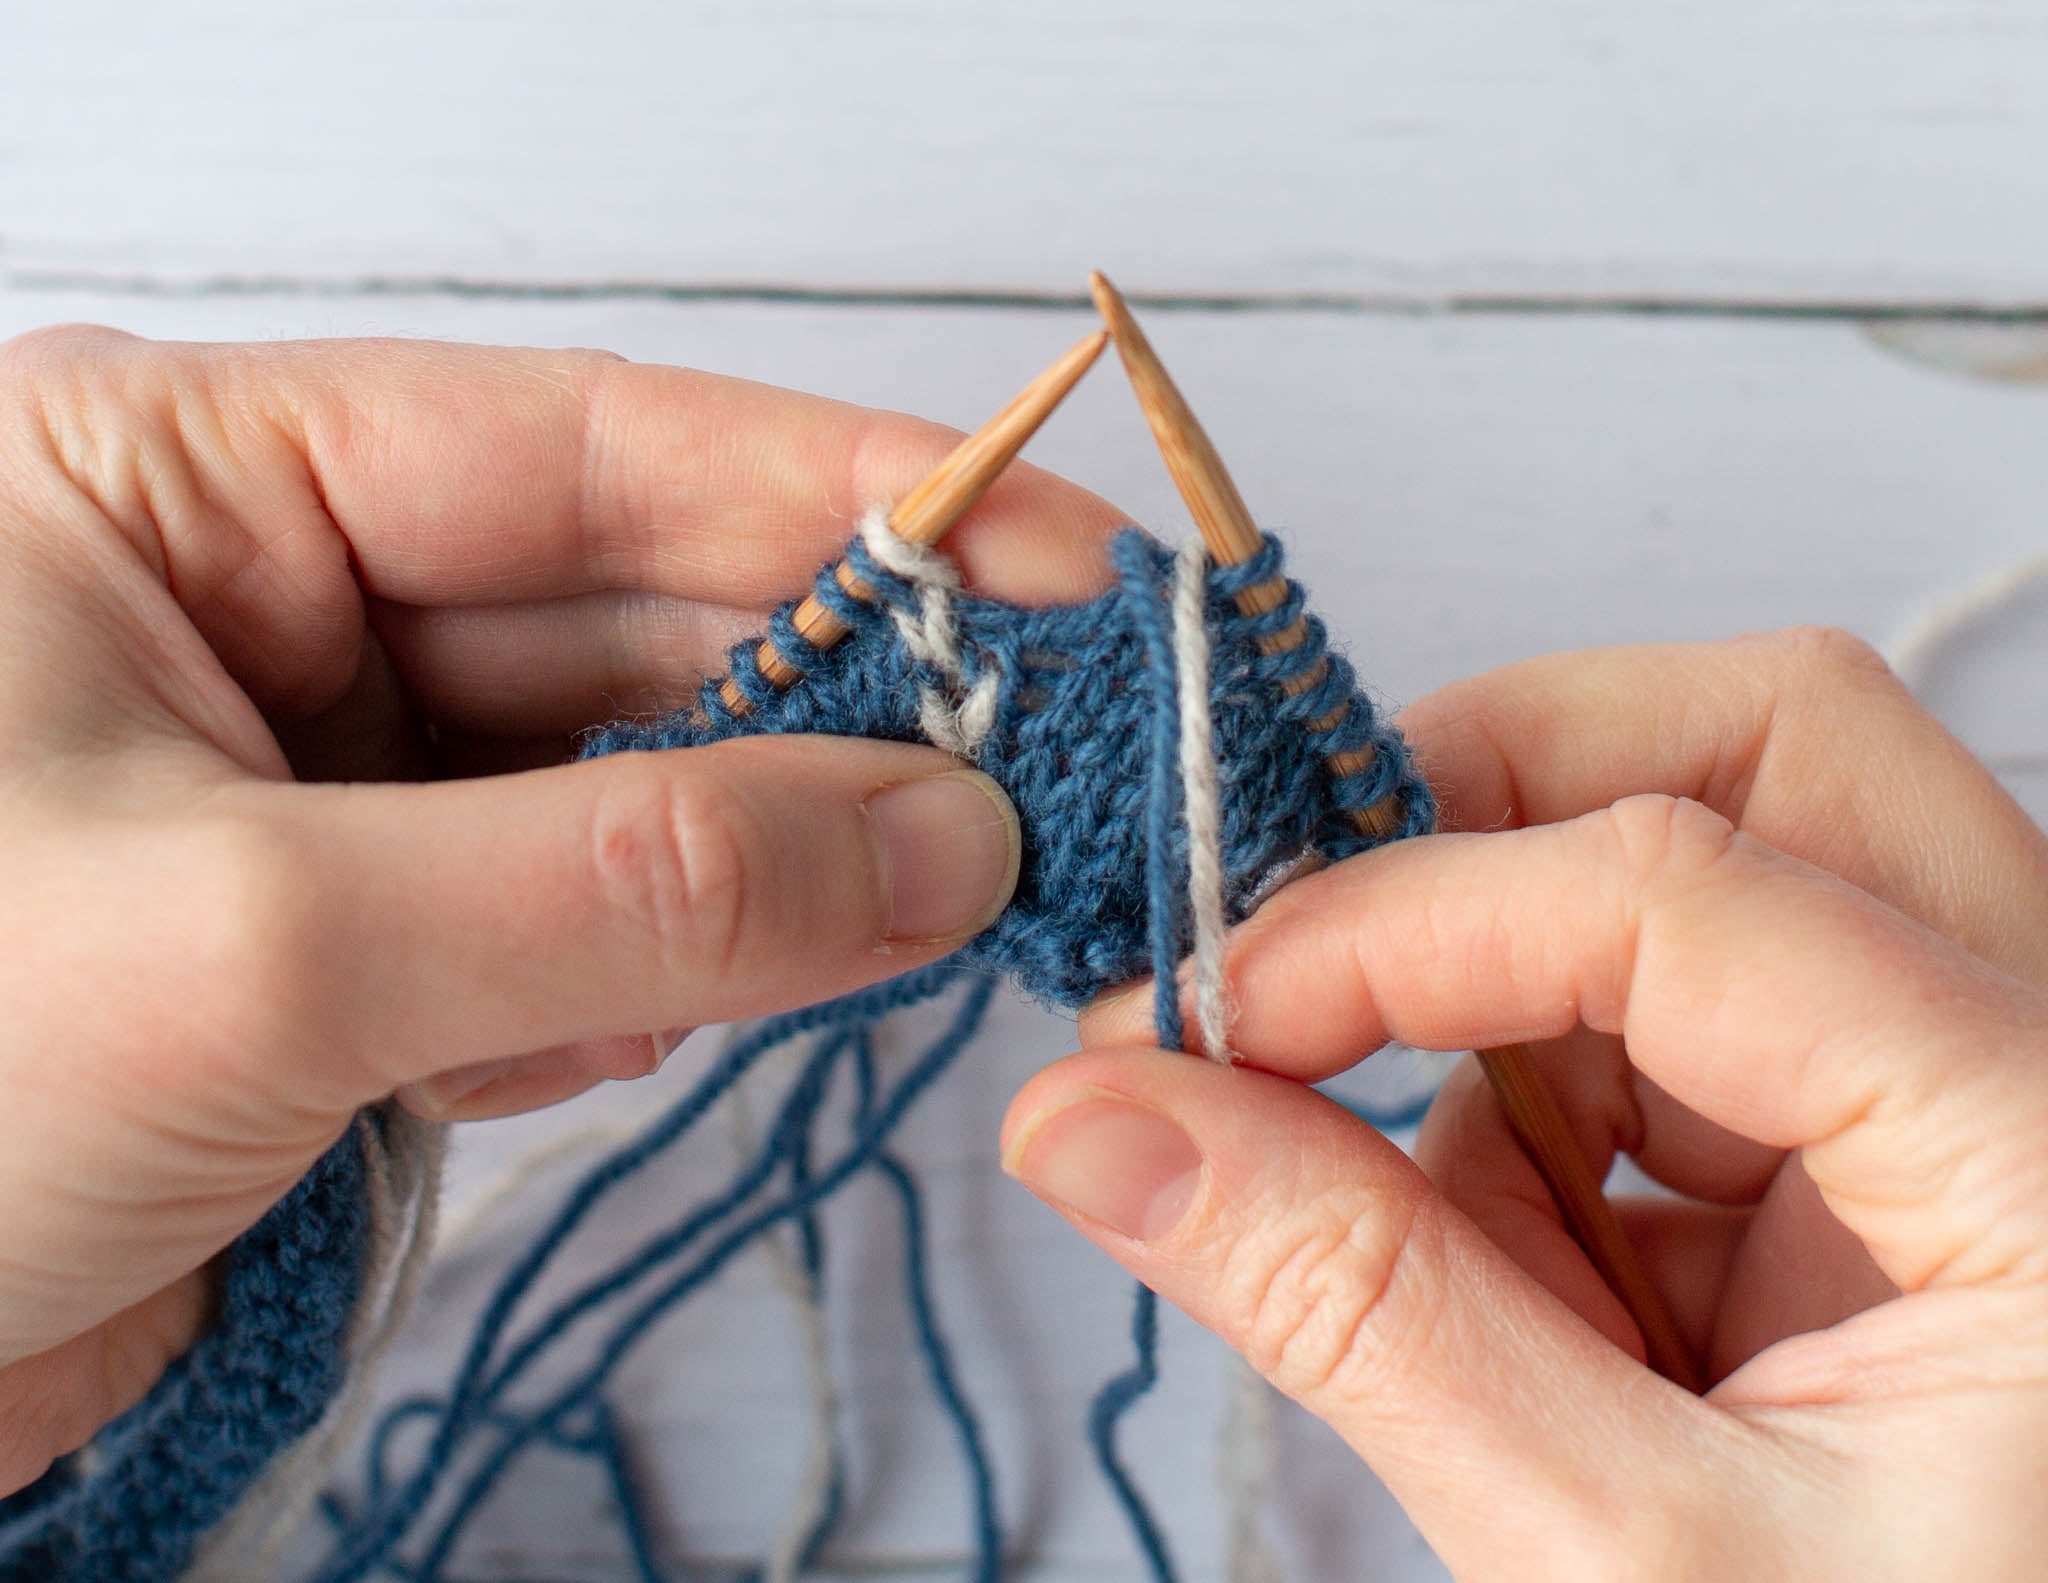 Two white hands hold a blue and white piece of knitting over a flat surface, the left hand grips the fabric and the right thumb and index finger hold a blue and white strand of yarn downwards.